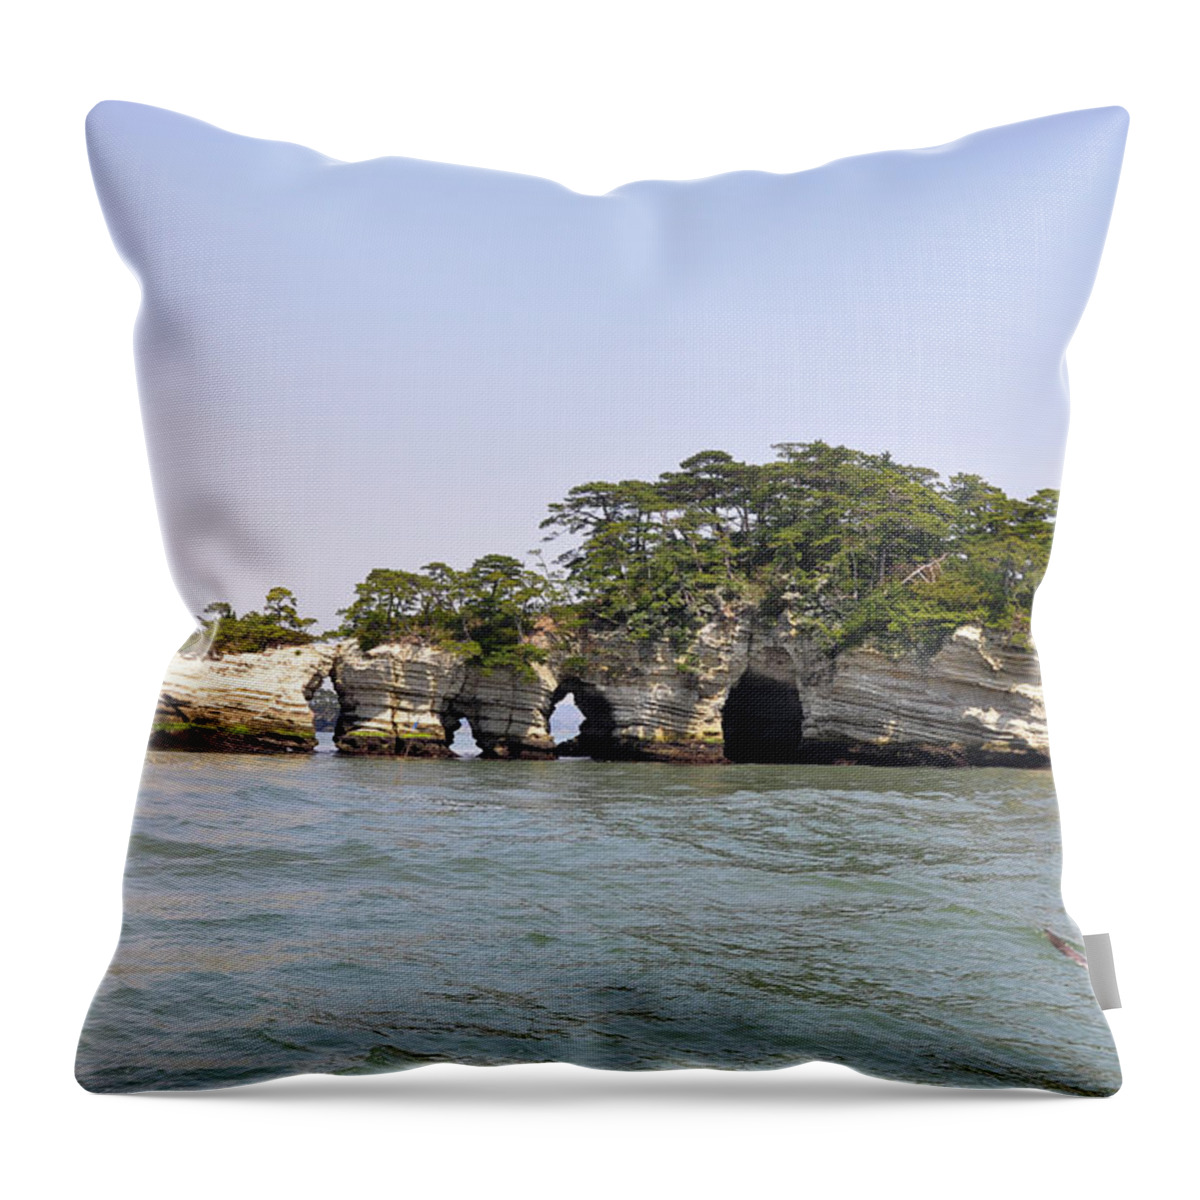 Scenics Throw Pillow featuring the photograph Three Views Of Japan, Islands Of by Japan From My Eye